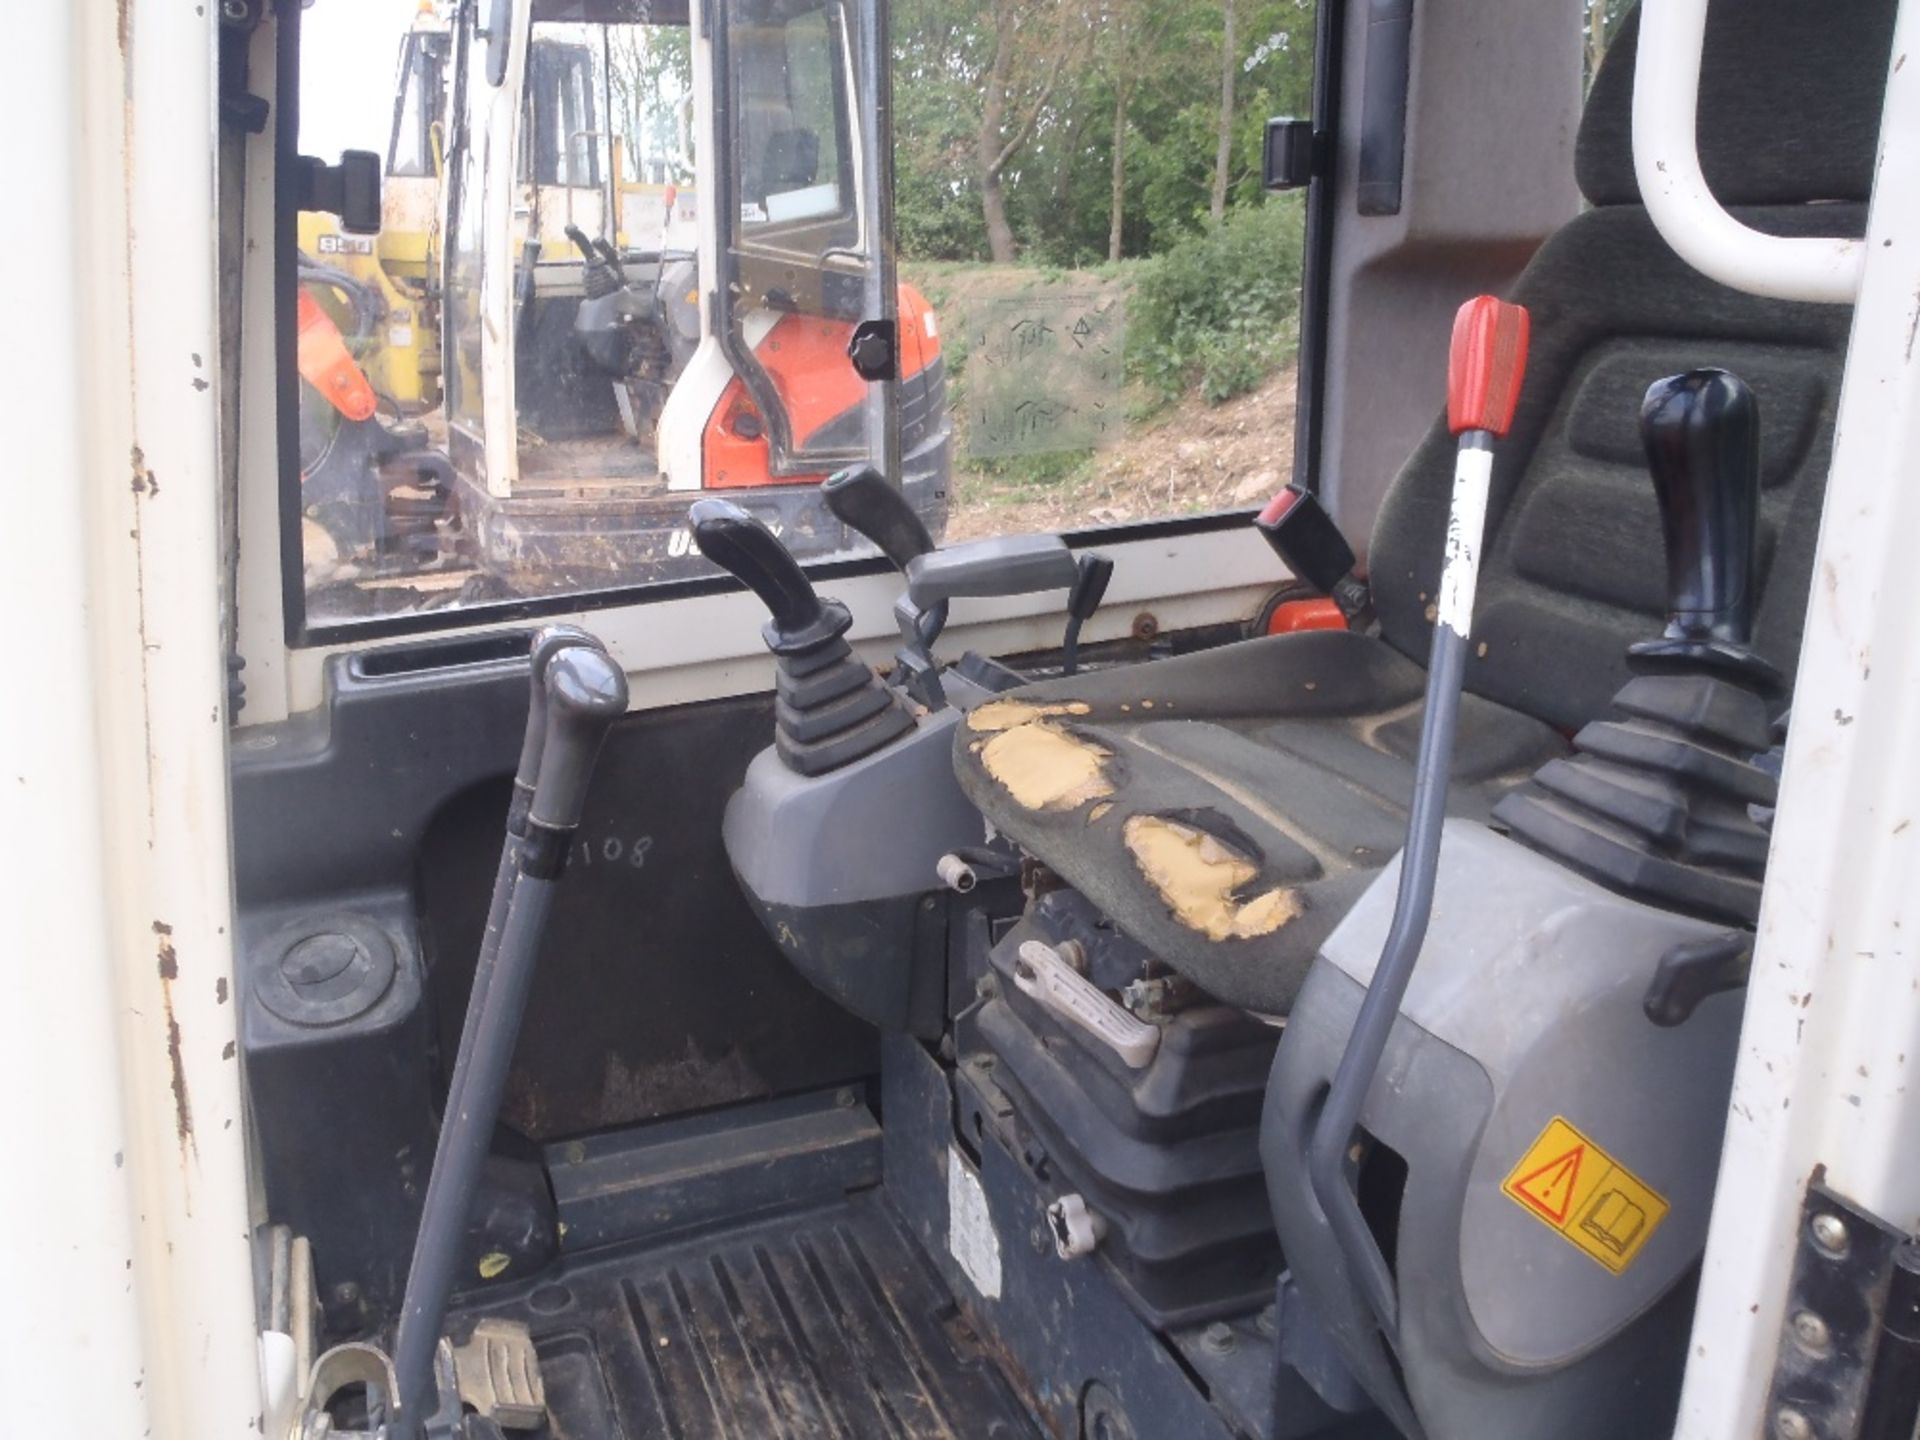 2008 Kubota KX 71 Mini Digger c/w 3 buckets, 1 owner from new Hours: 4350 - Image 6 of 6